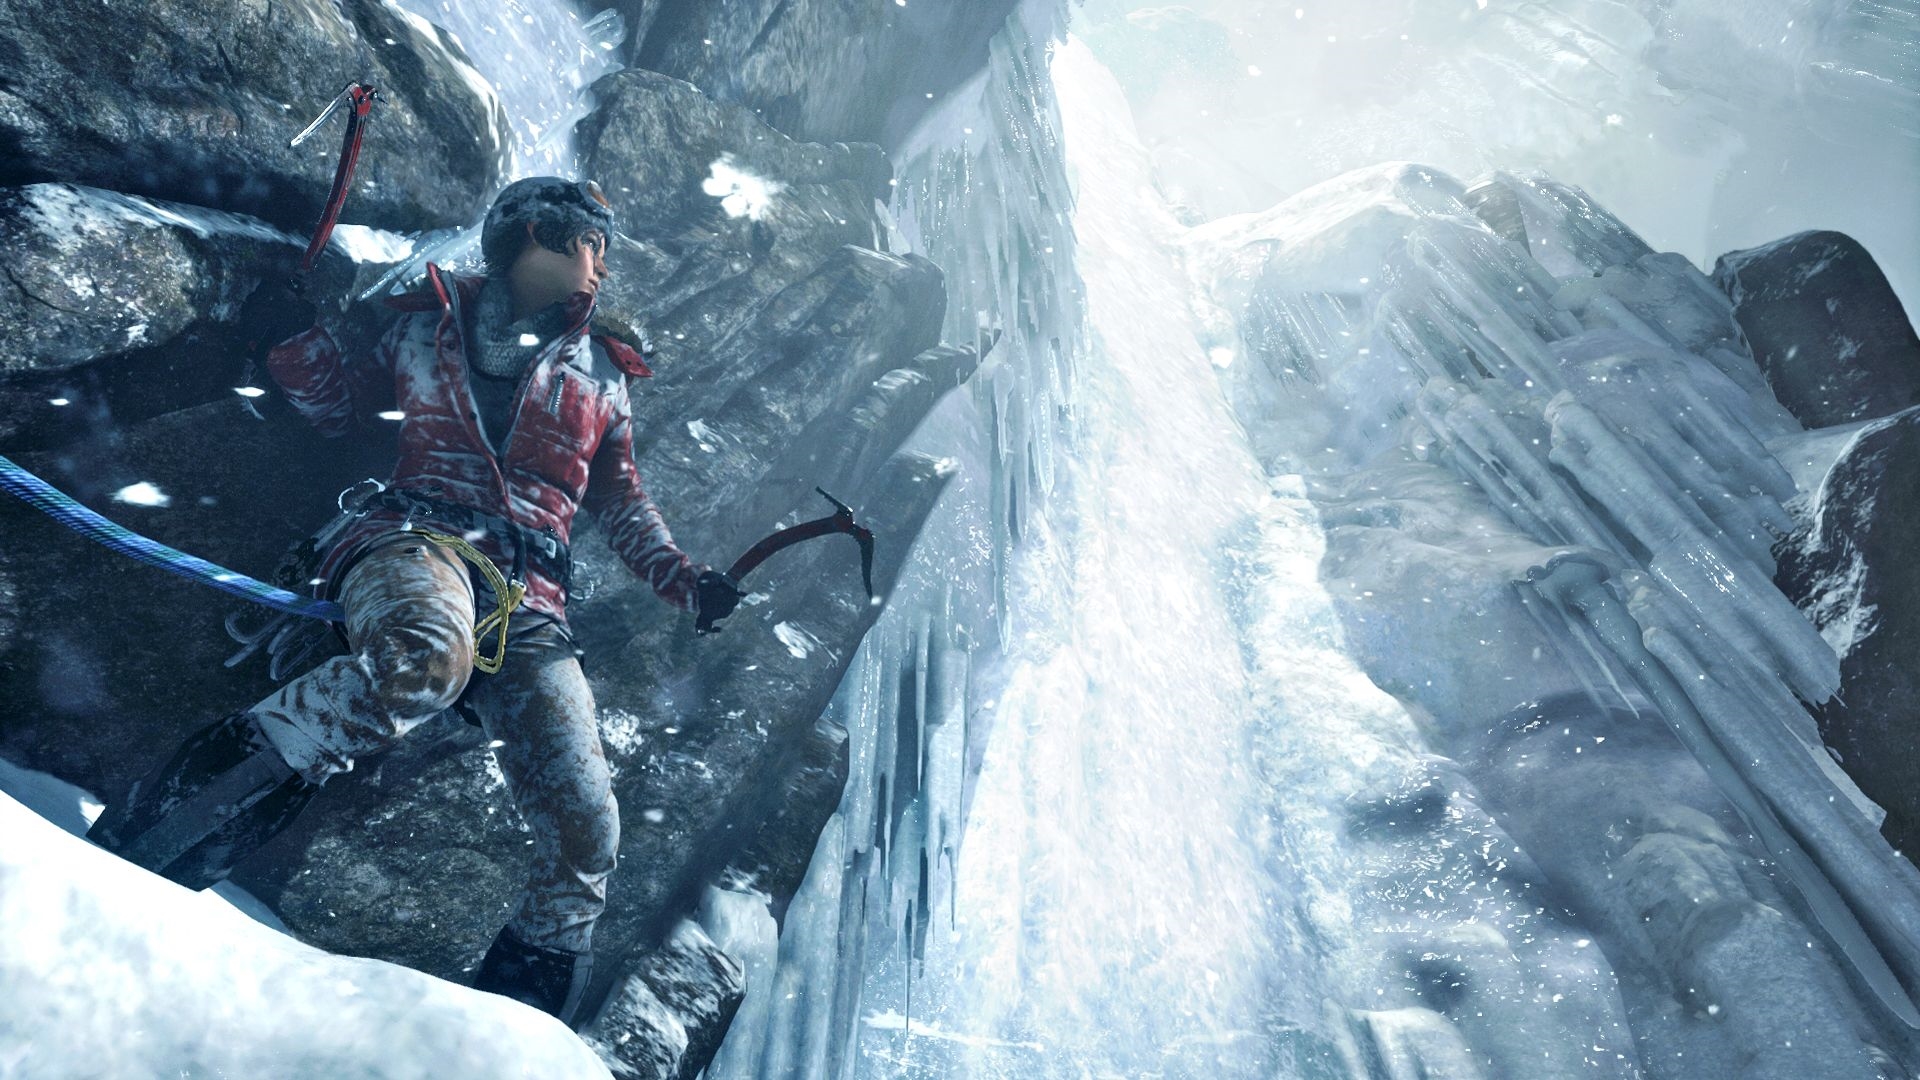 iphone x rise of the tomb raider images